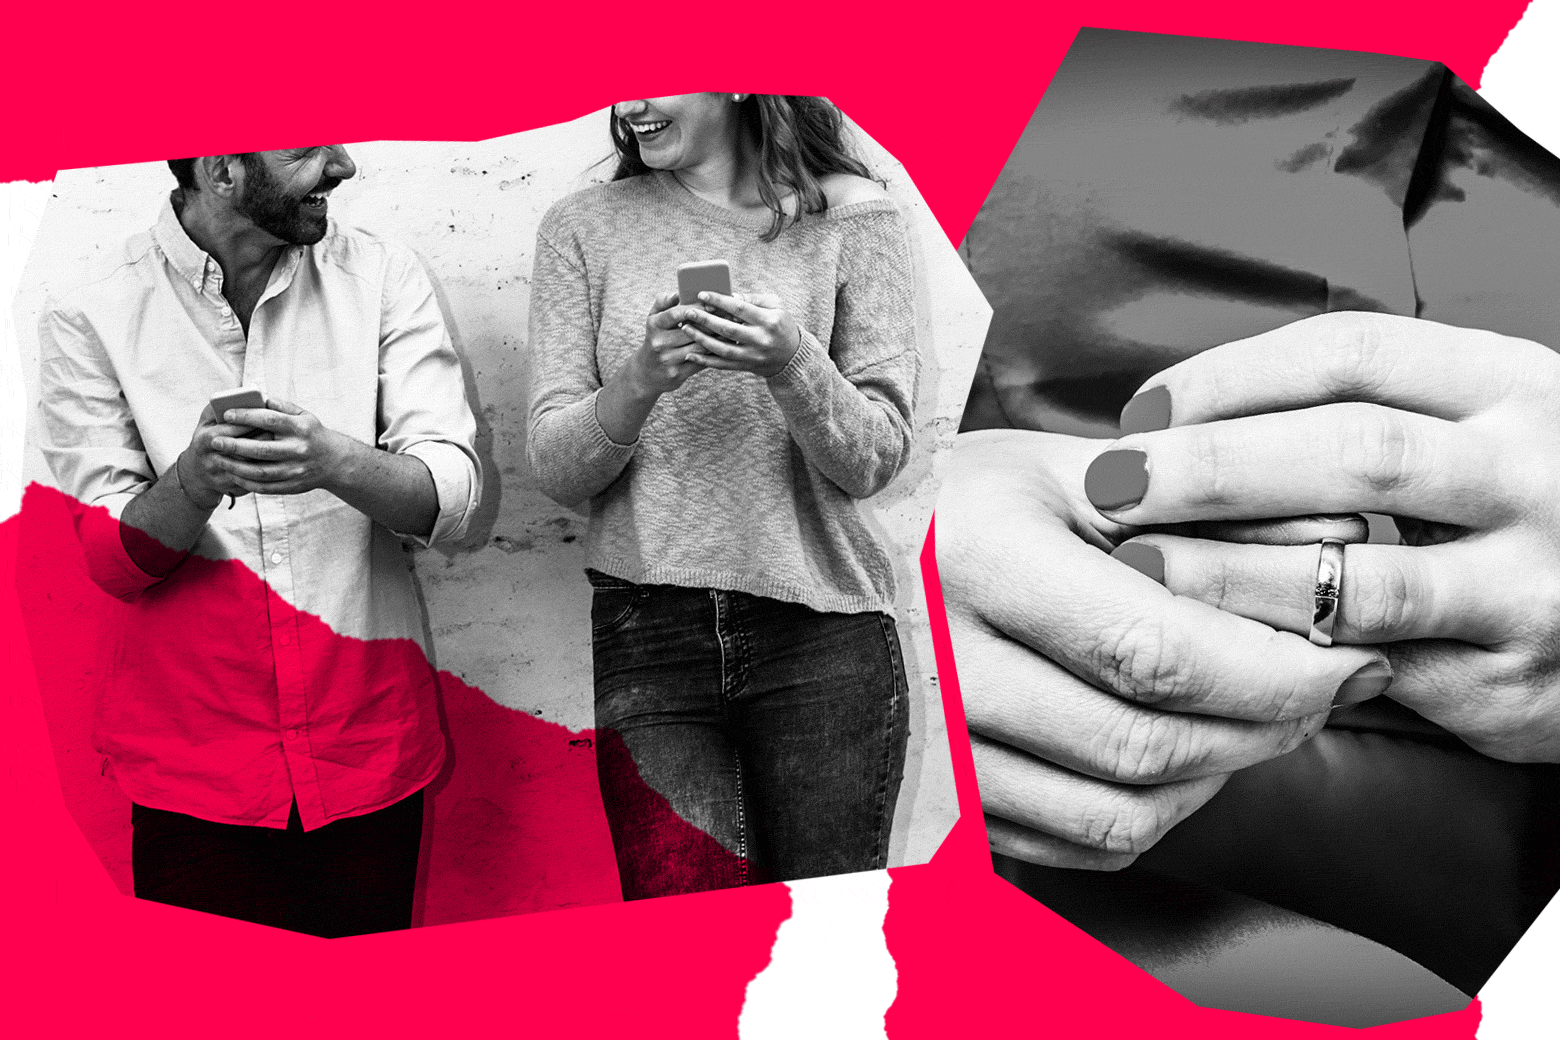 Blowing inside friends hot mom My Husband Is Prioritizing His Innocent Friendship With A Woman Over Me And More Advice From Dear Prudie